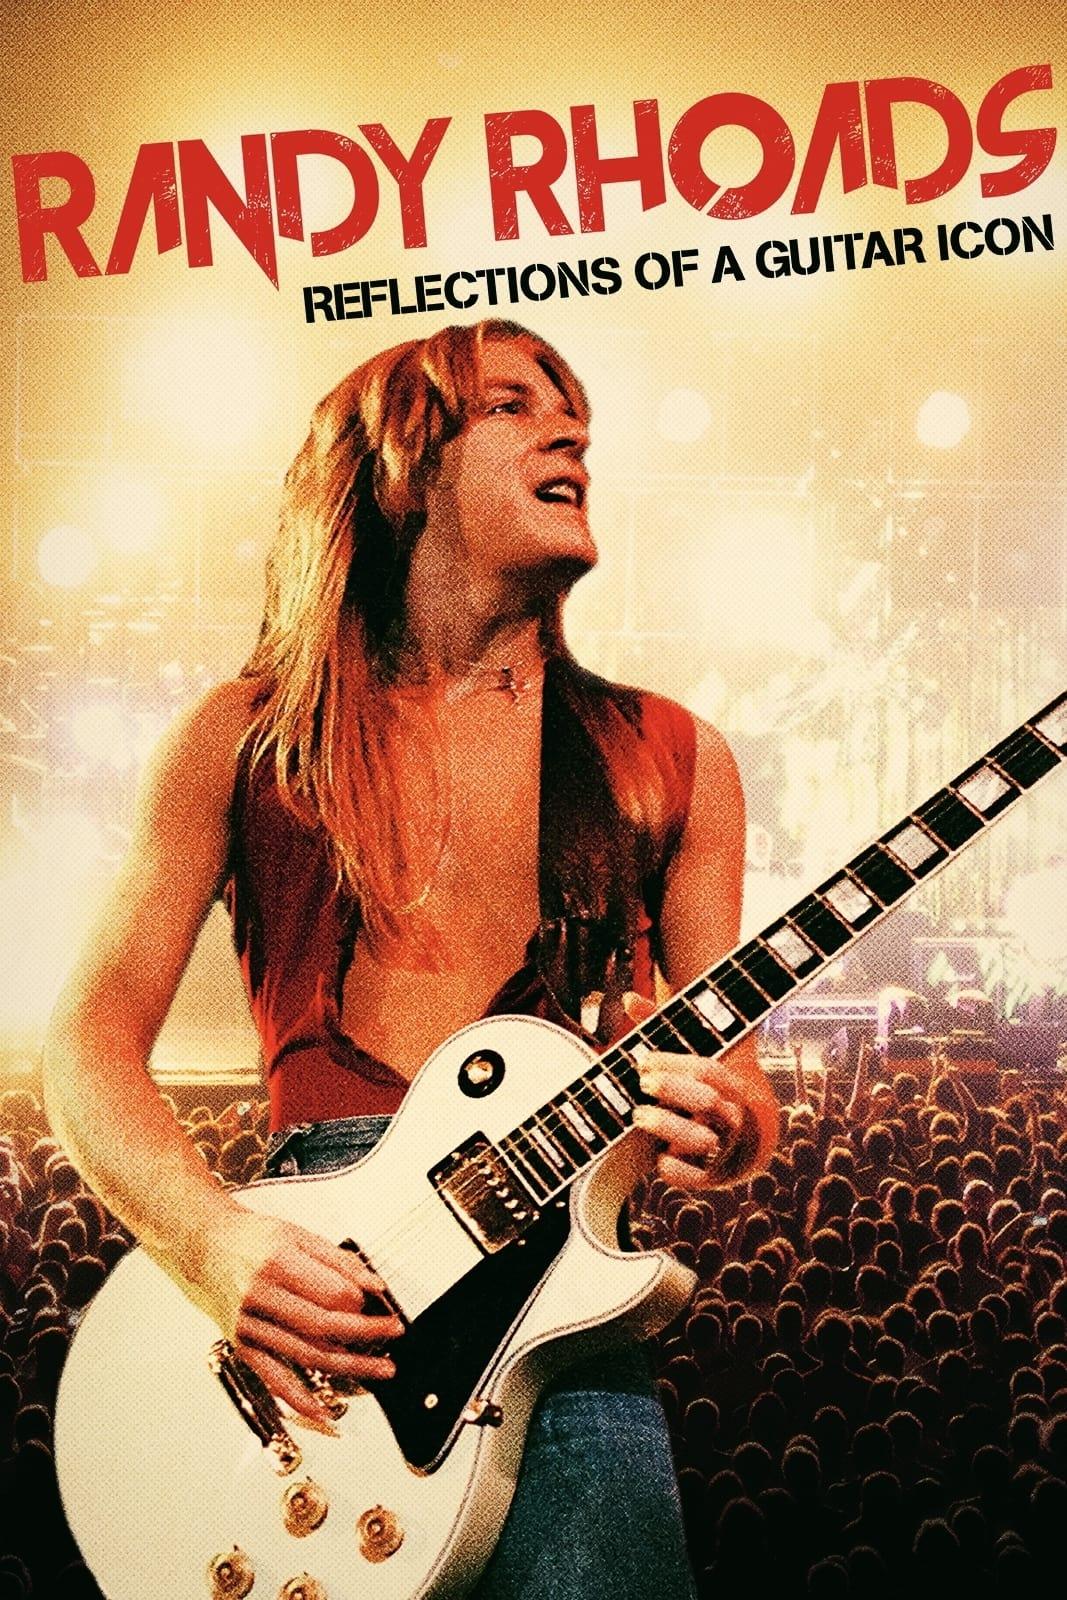 Randy Rhoads: Reflections of a Guitar Icon poster